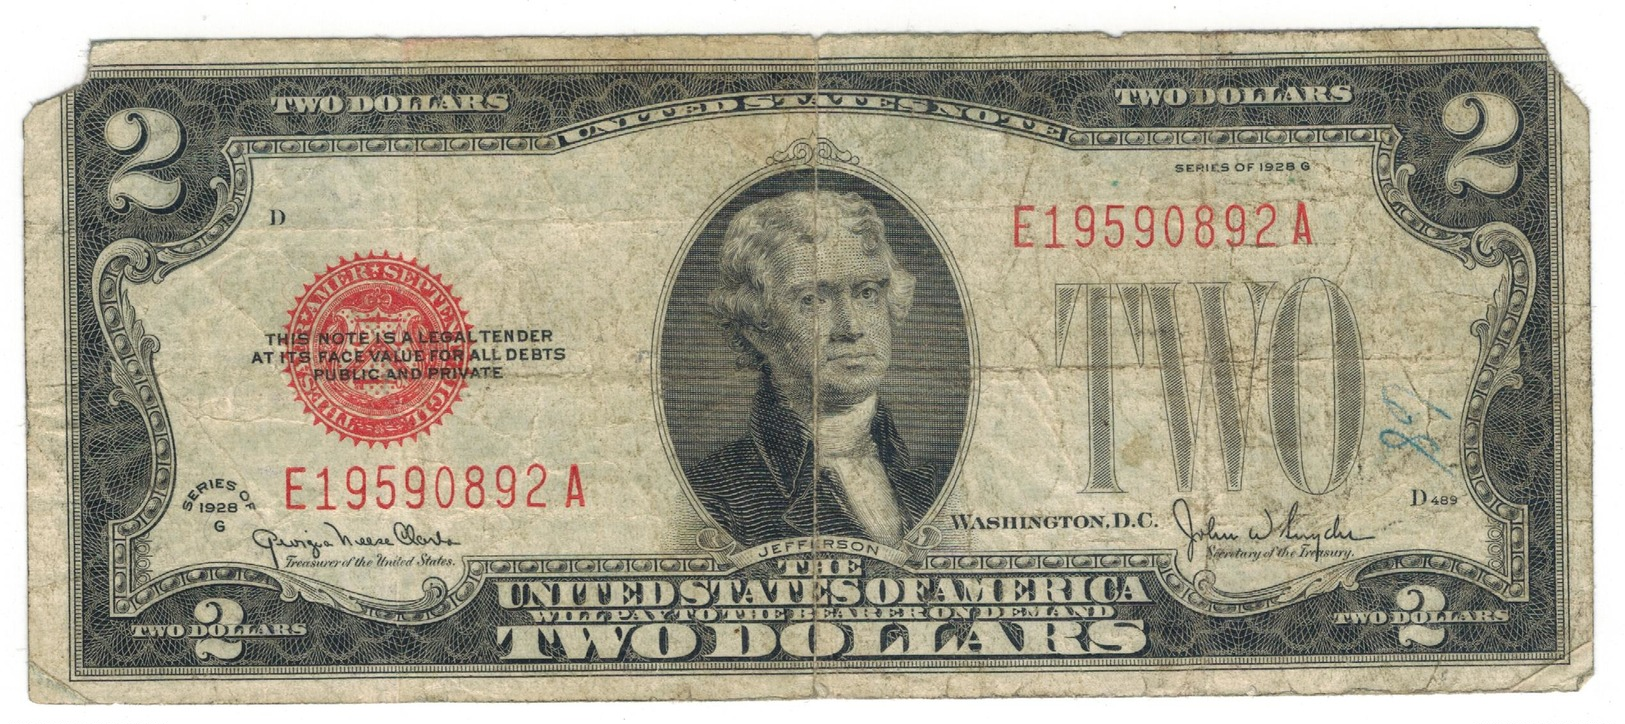 USA, 2 Dollars 1928, Used, See Scan. - United States Notes (1928-1953)